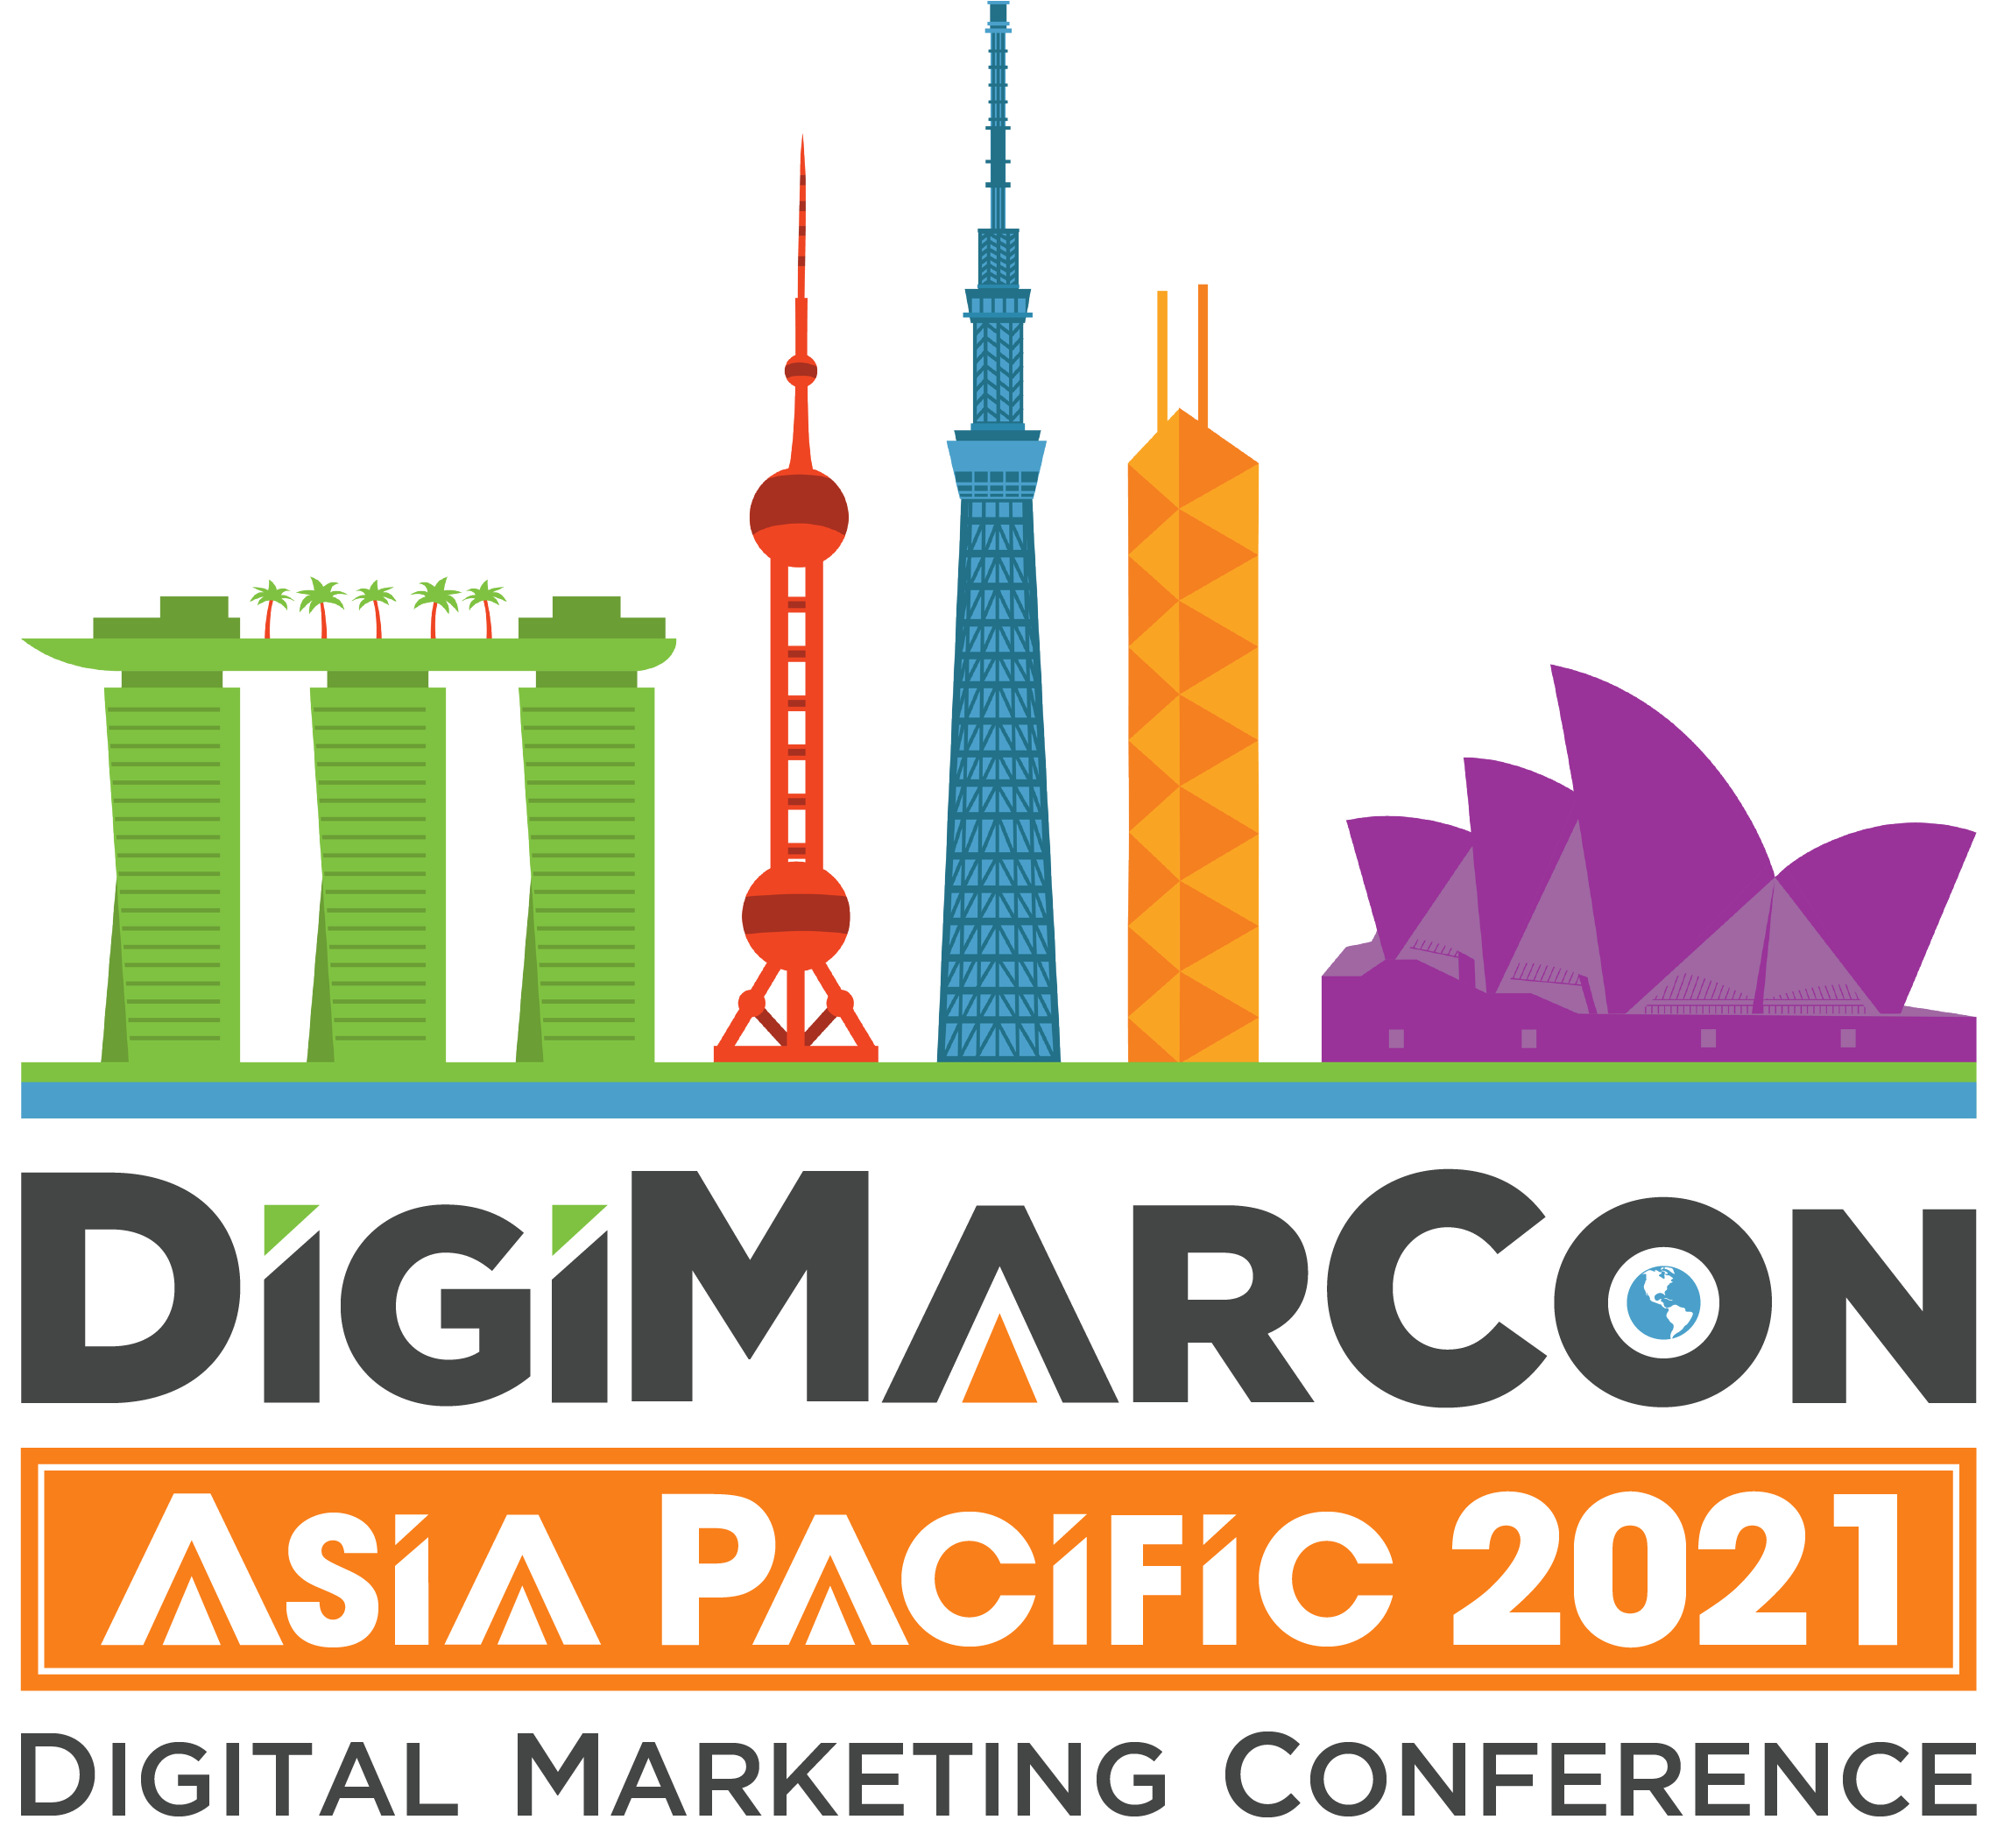 DigiMarCon Asia Pacific 2021 - Digital Marketing, Media and Advertising Conference